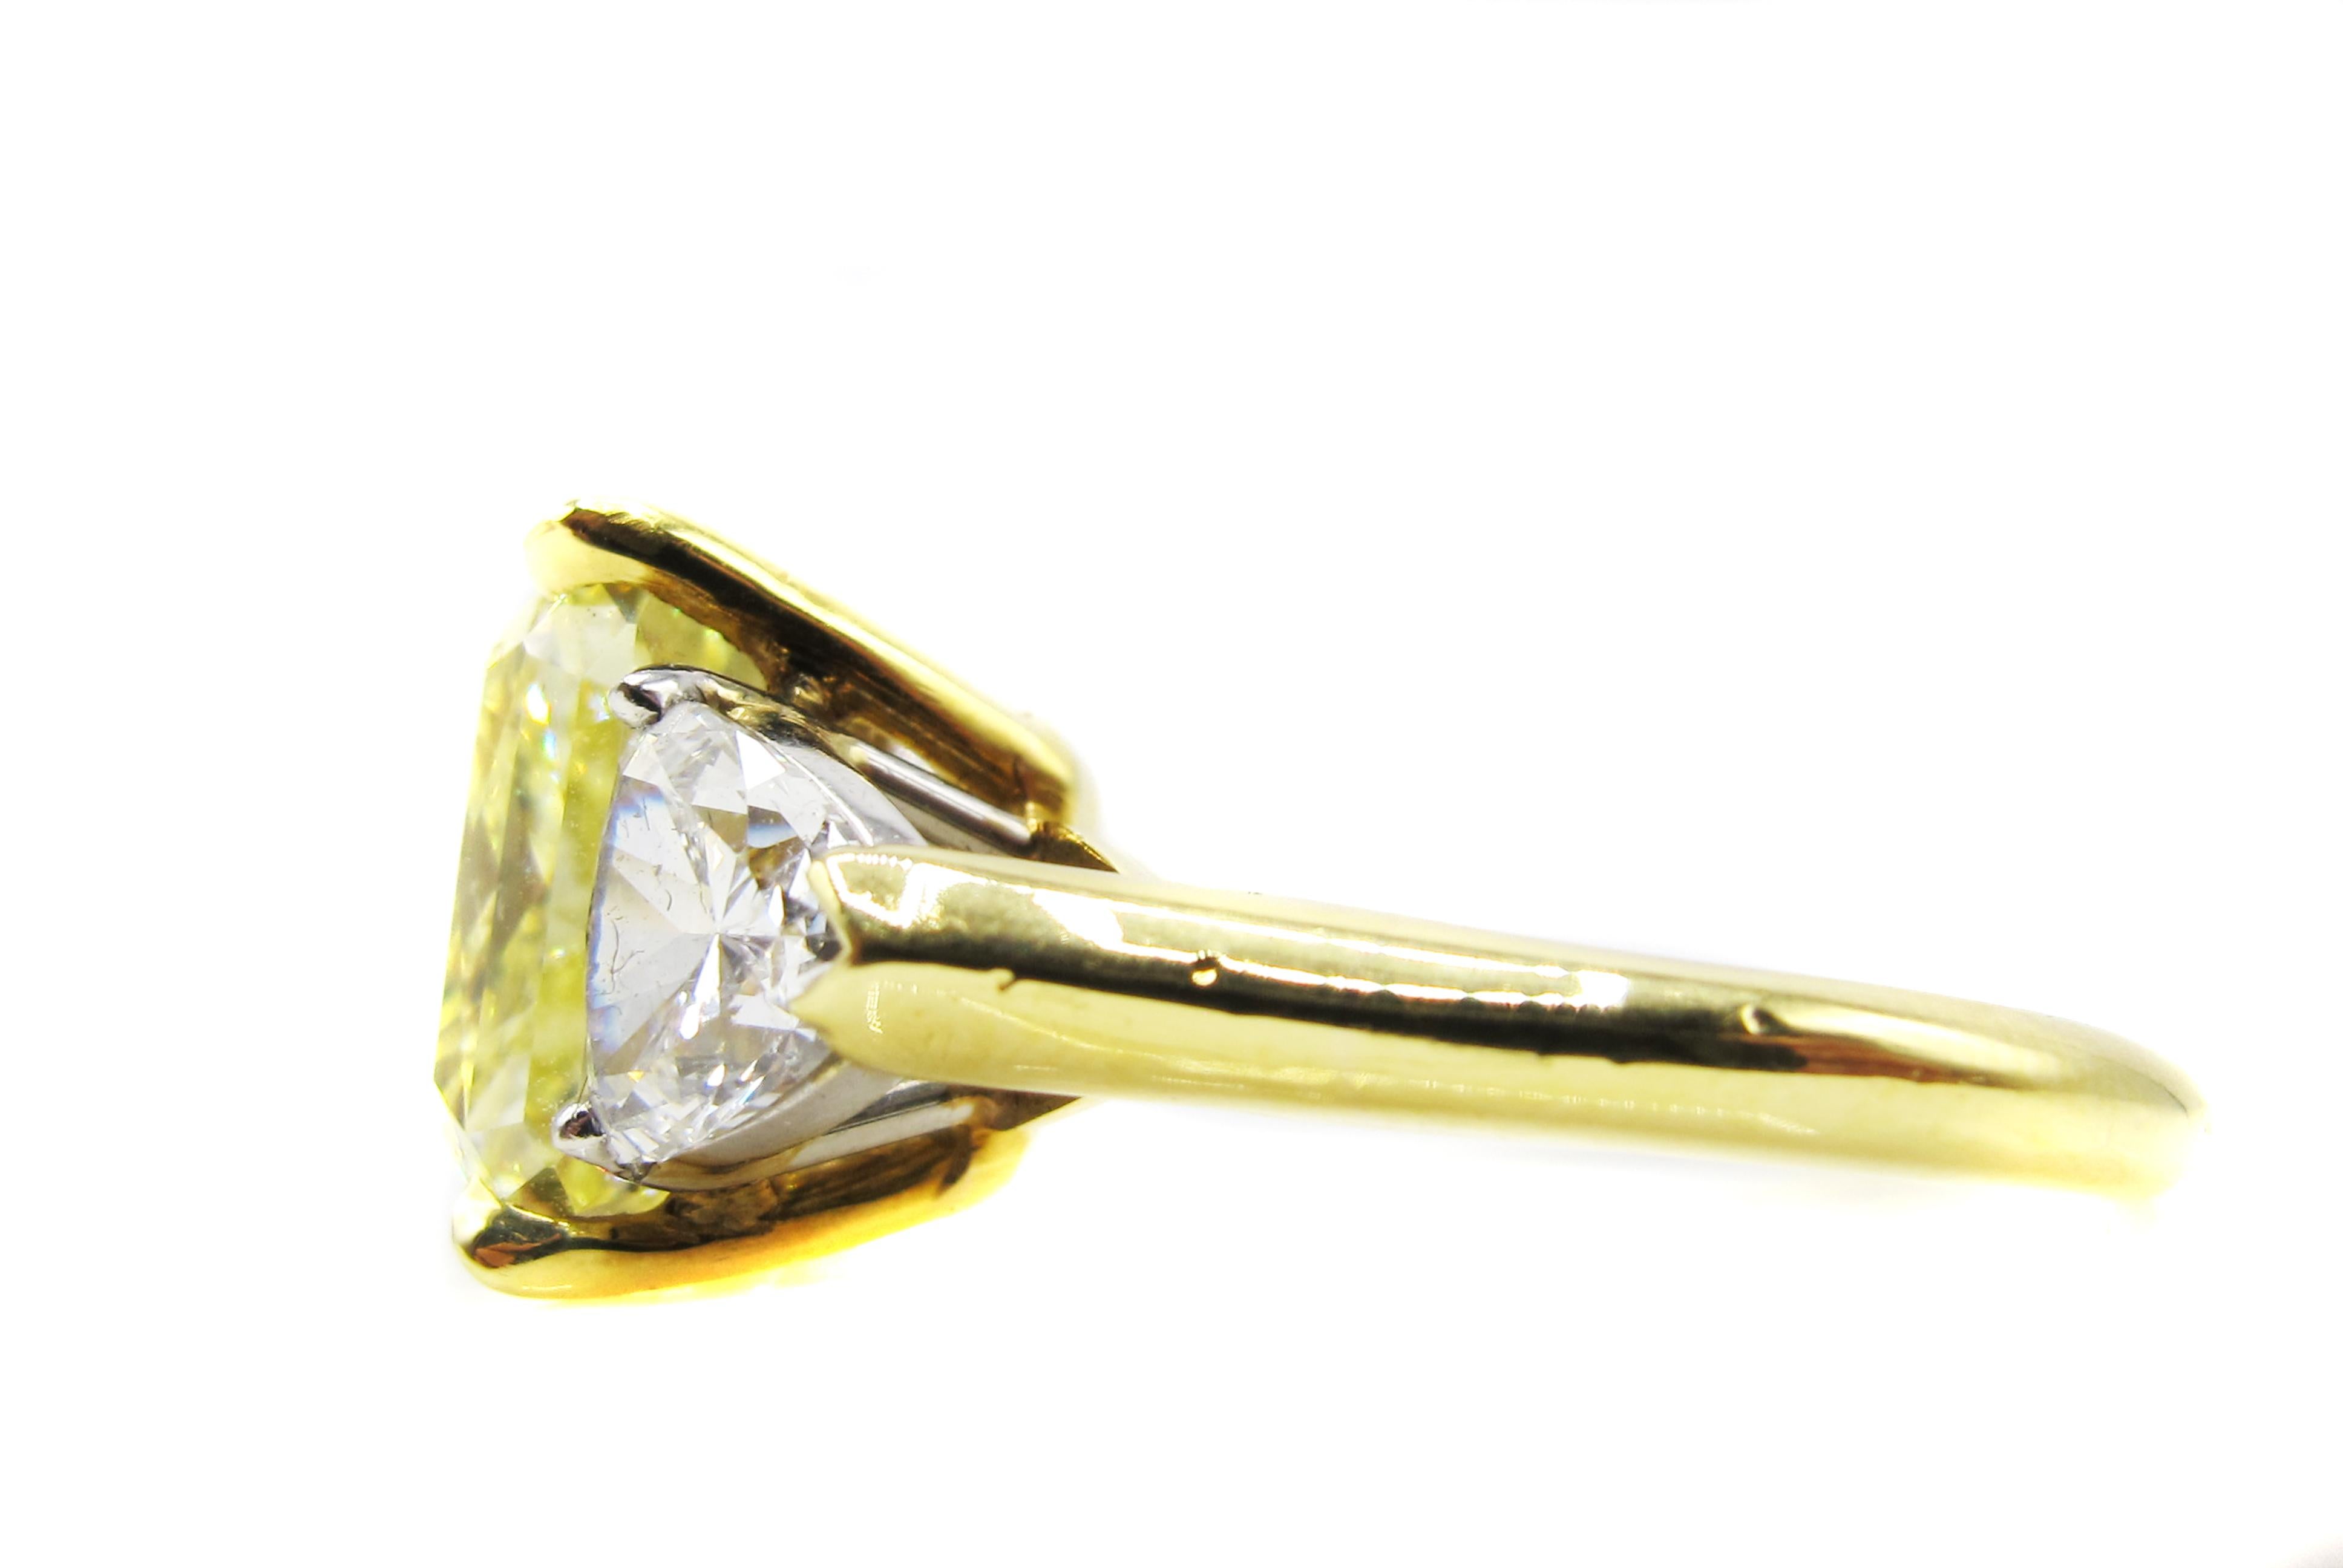 Amazing lemon yellow natural fancy intense yellow diamond  ring set in an 18 karat yellow gold and platinum superbly hand crafted mounting. The extremely well cut radiant has an extraordinary spread looking larger than stones the same size. This